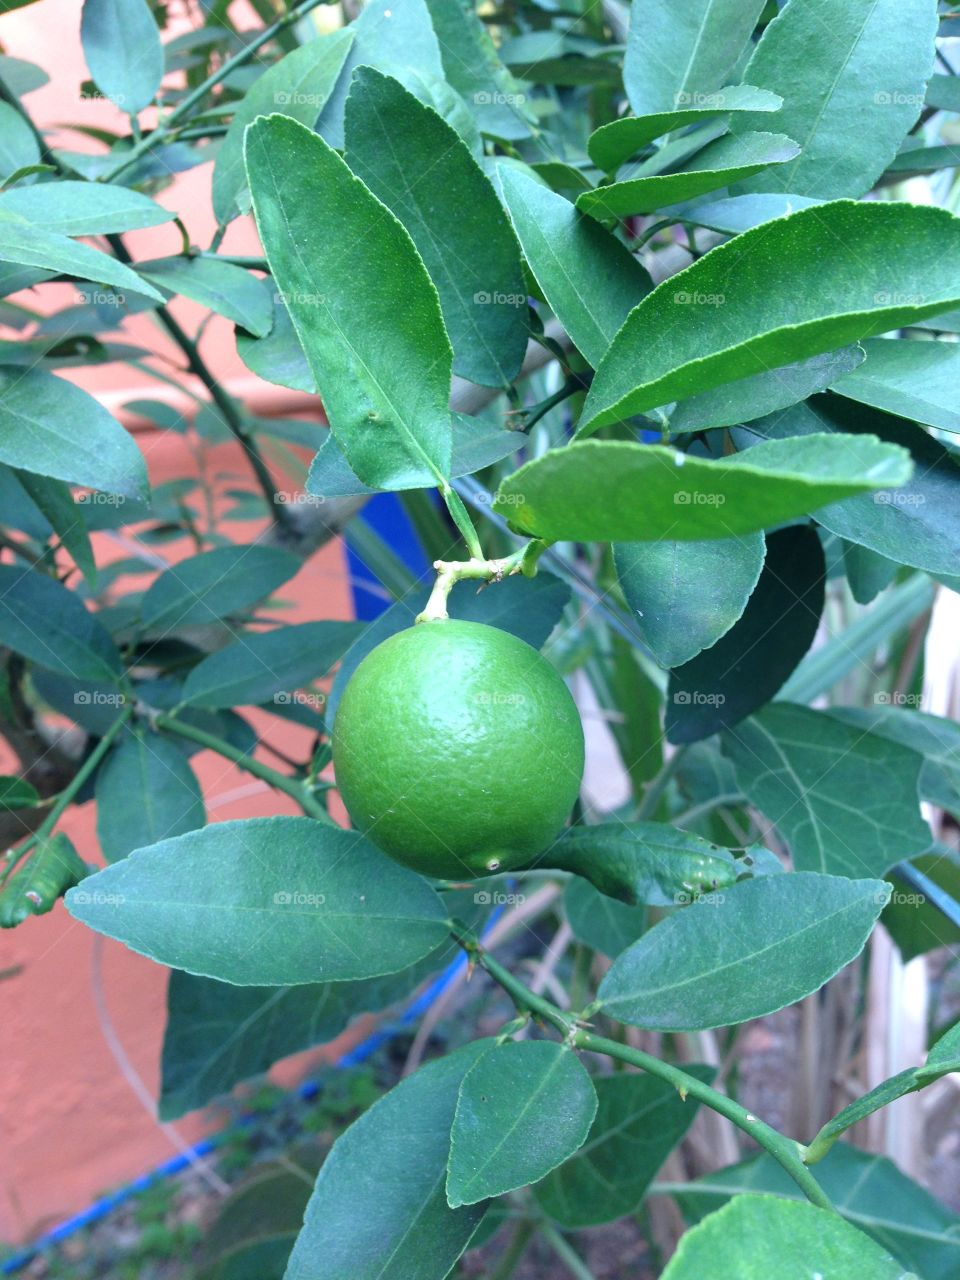 Look this lemon,It's so beautiful and gracious,I love nature,and animals I love too like my bird Julian =D